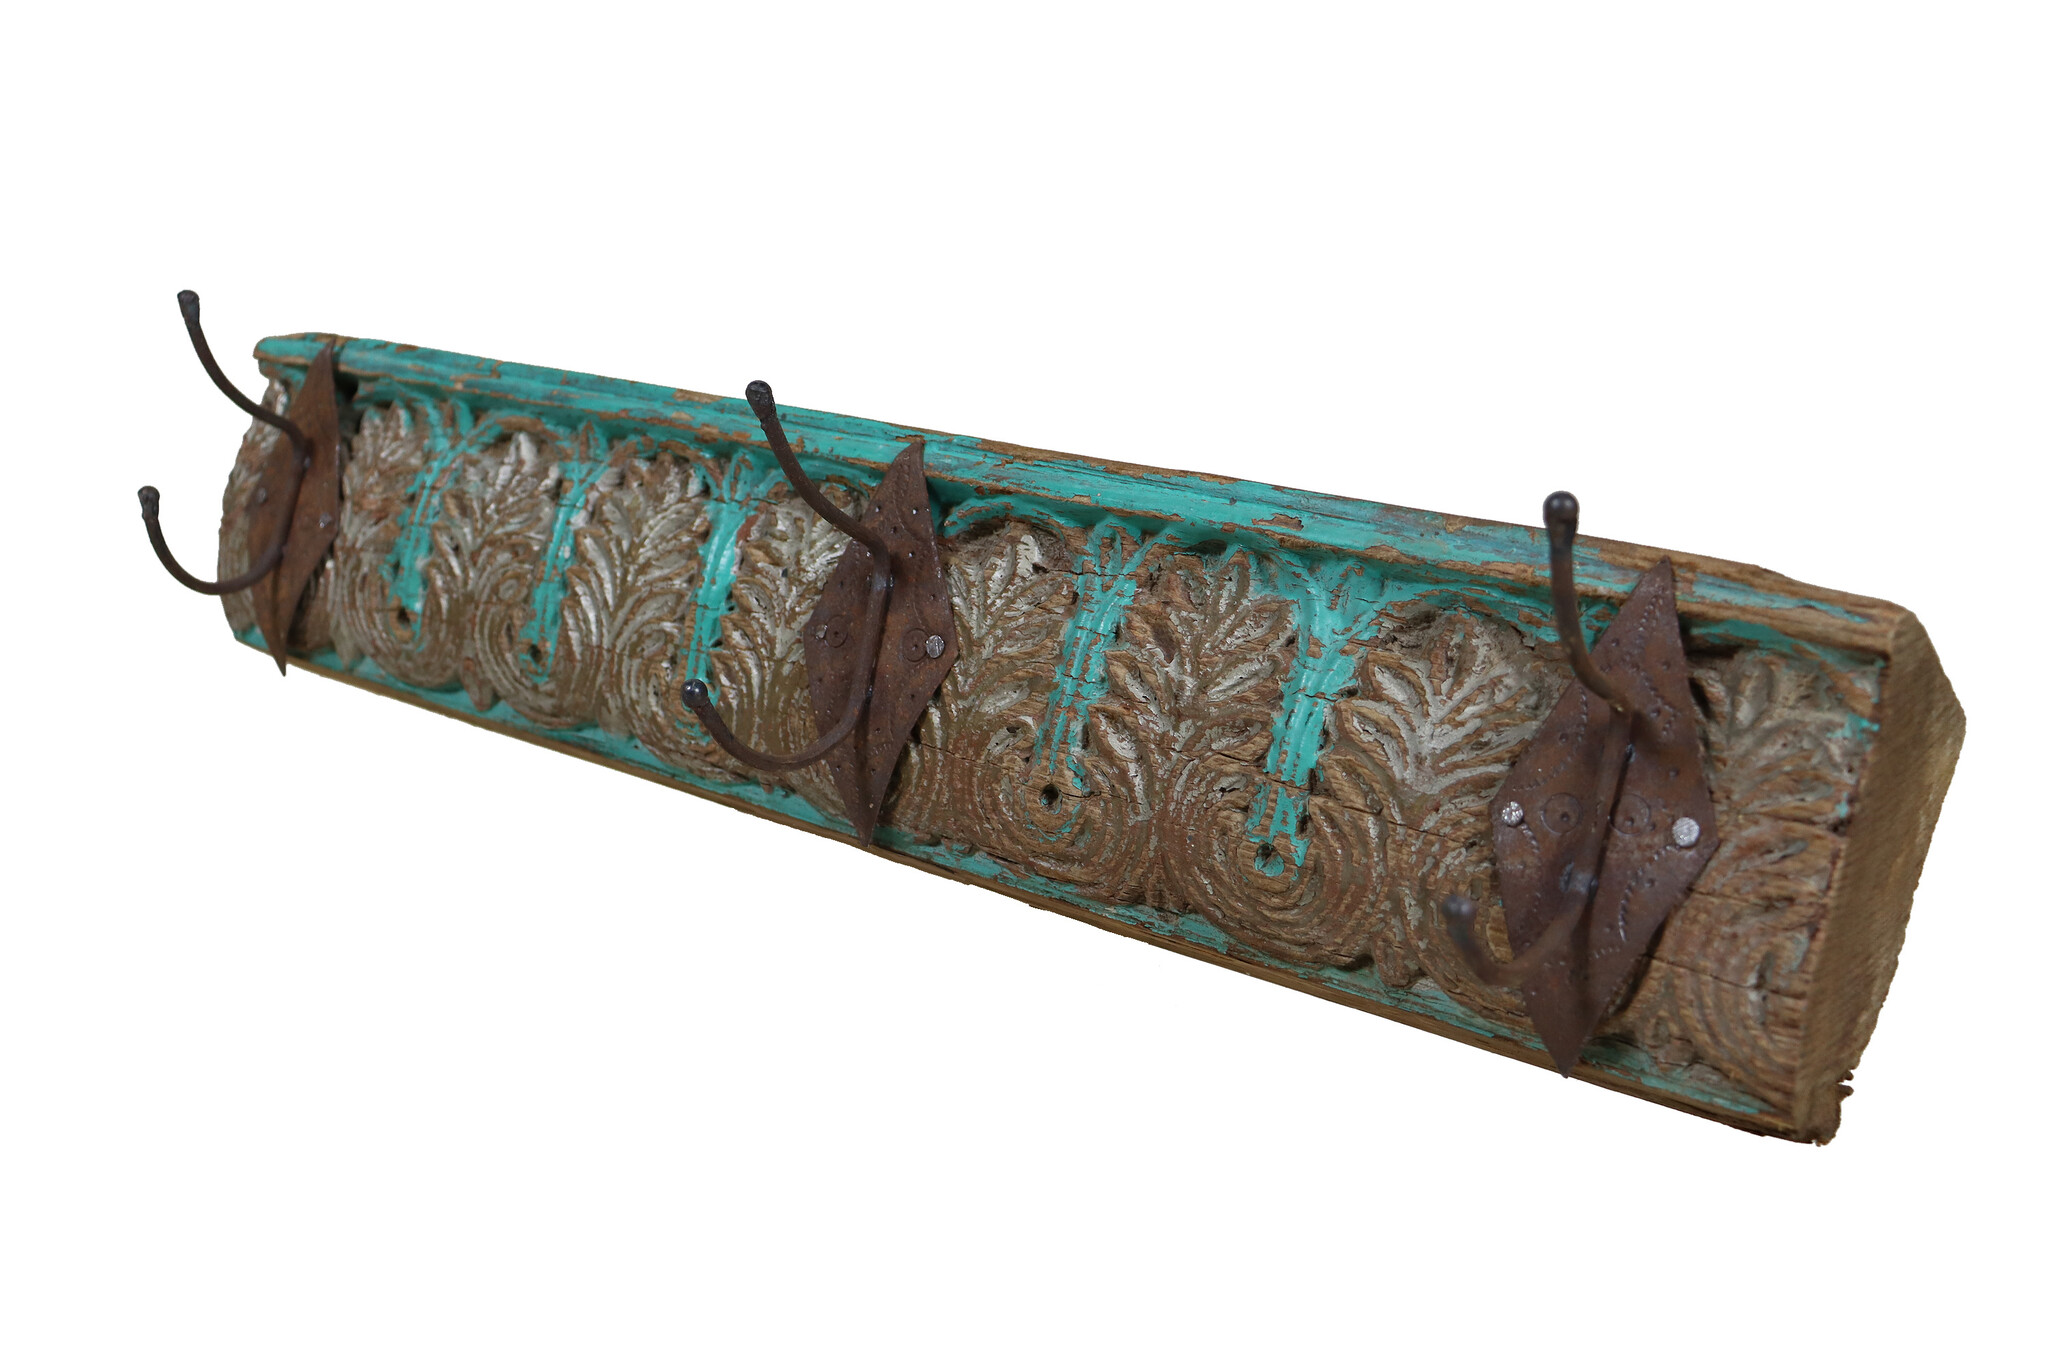 50 cm antique  Coat and hat Rack with 3 wrought iron hooks  Nuristan Afghanistan  No:6